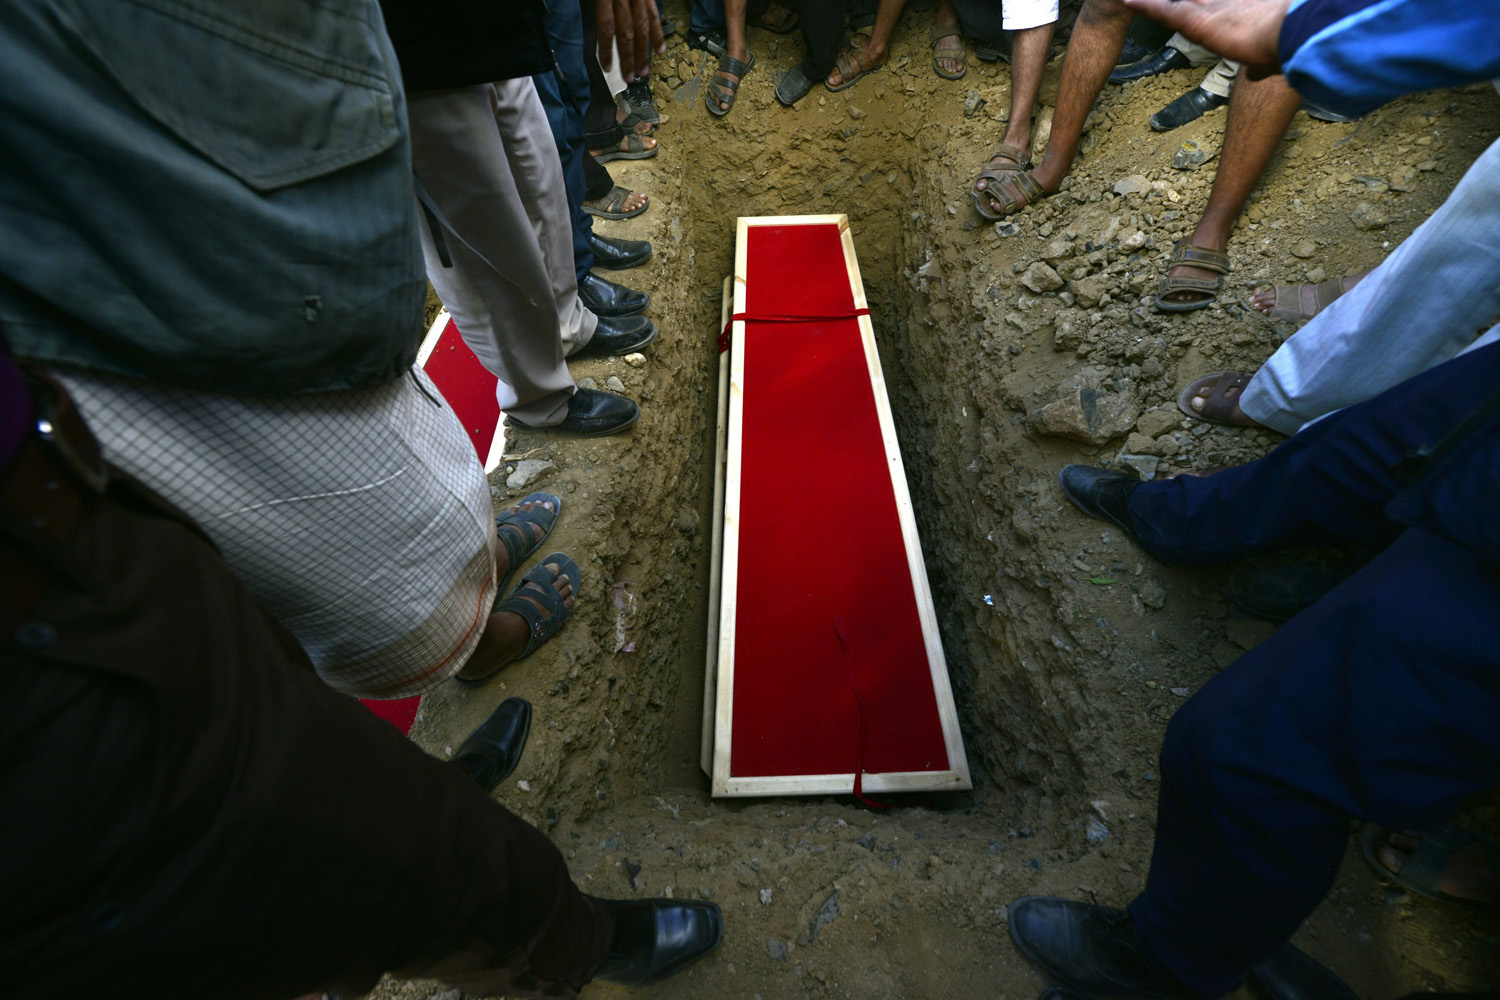 Mar. 30, 2014. Yemeni mourners stand over a grave at a cemetery ahead of burying one of the soldiers who were killed by gunmen at a checkpoint a week ago during a funeral procession in Sanaía, Yemen.